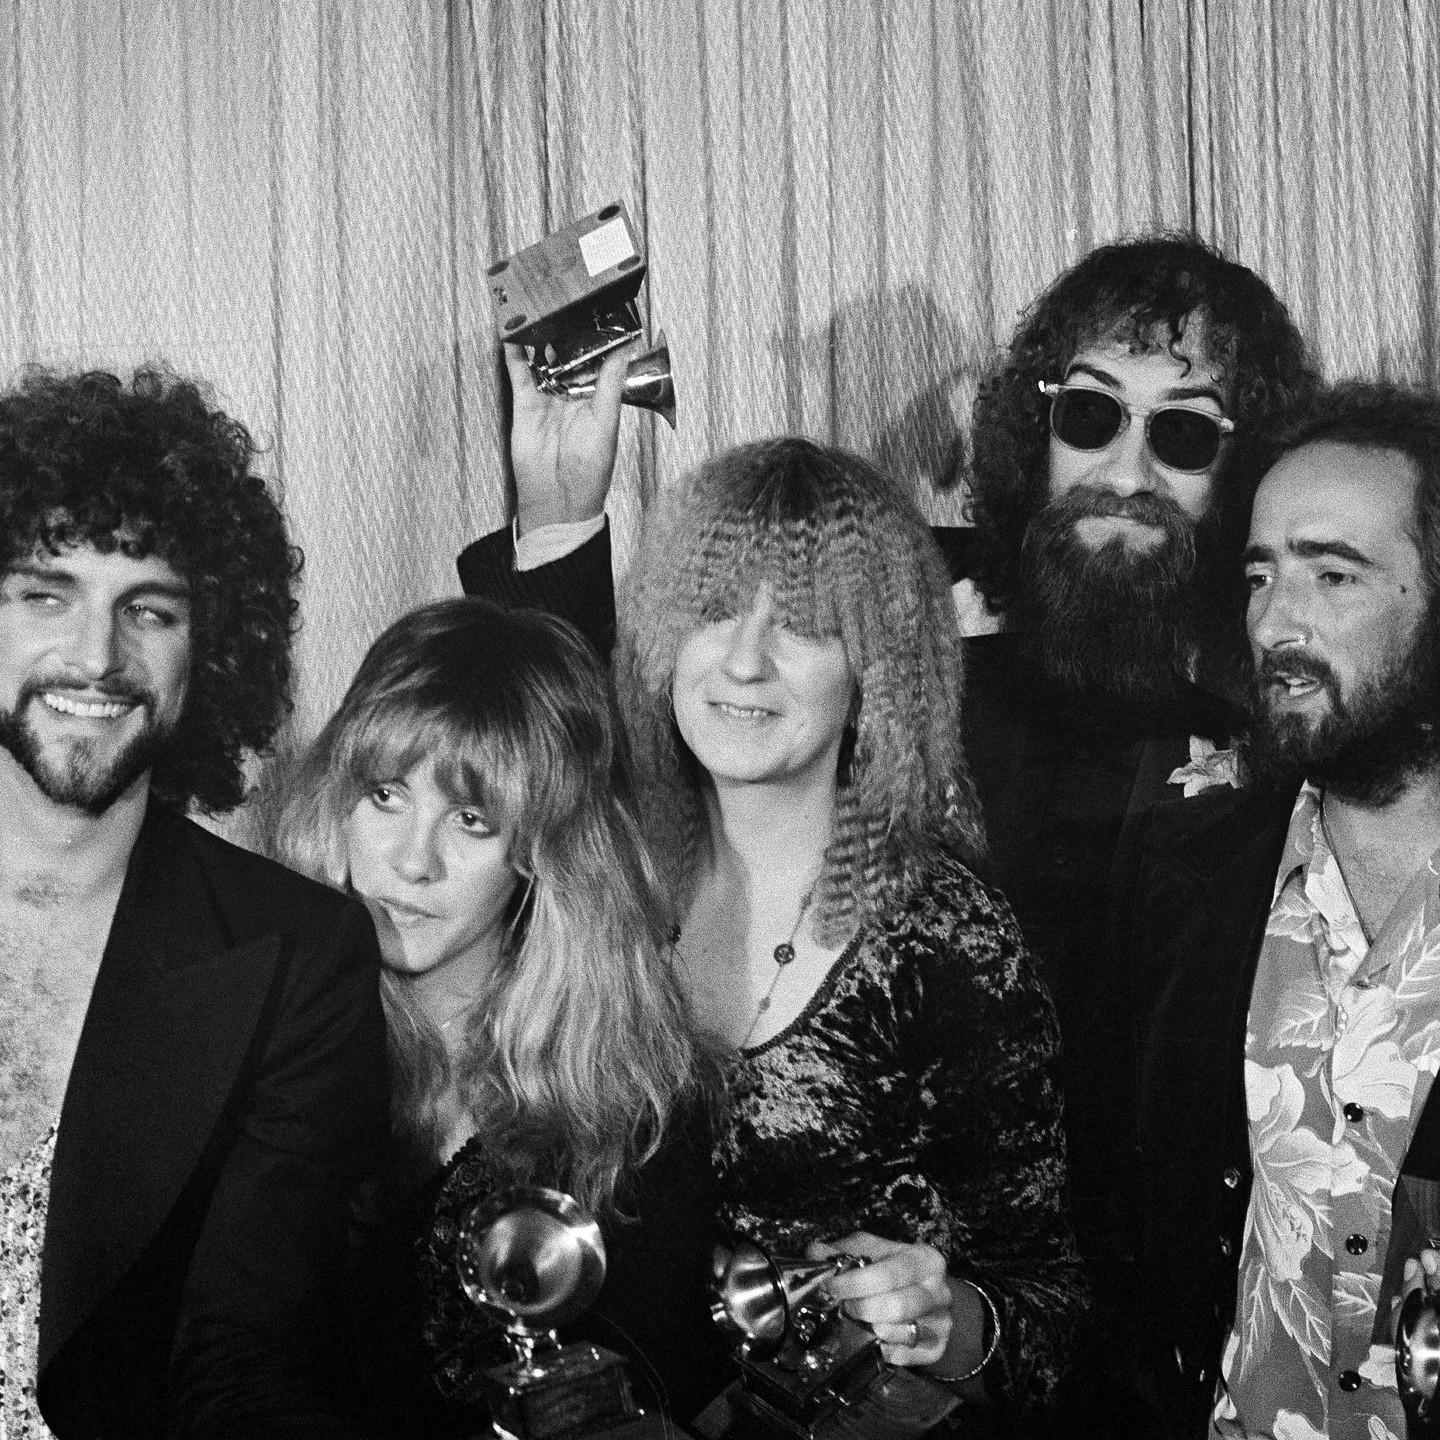 Us Weekly - Christine McVie, the longtime keyboardist and co-lead vocalist of #FleetwoodMac, has pas